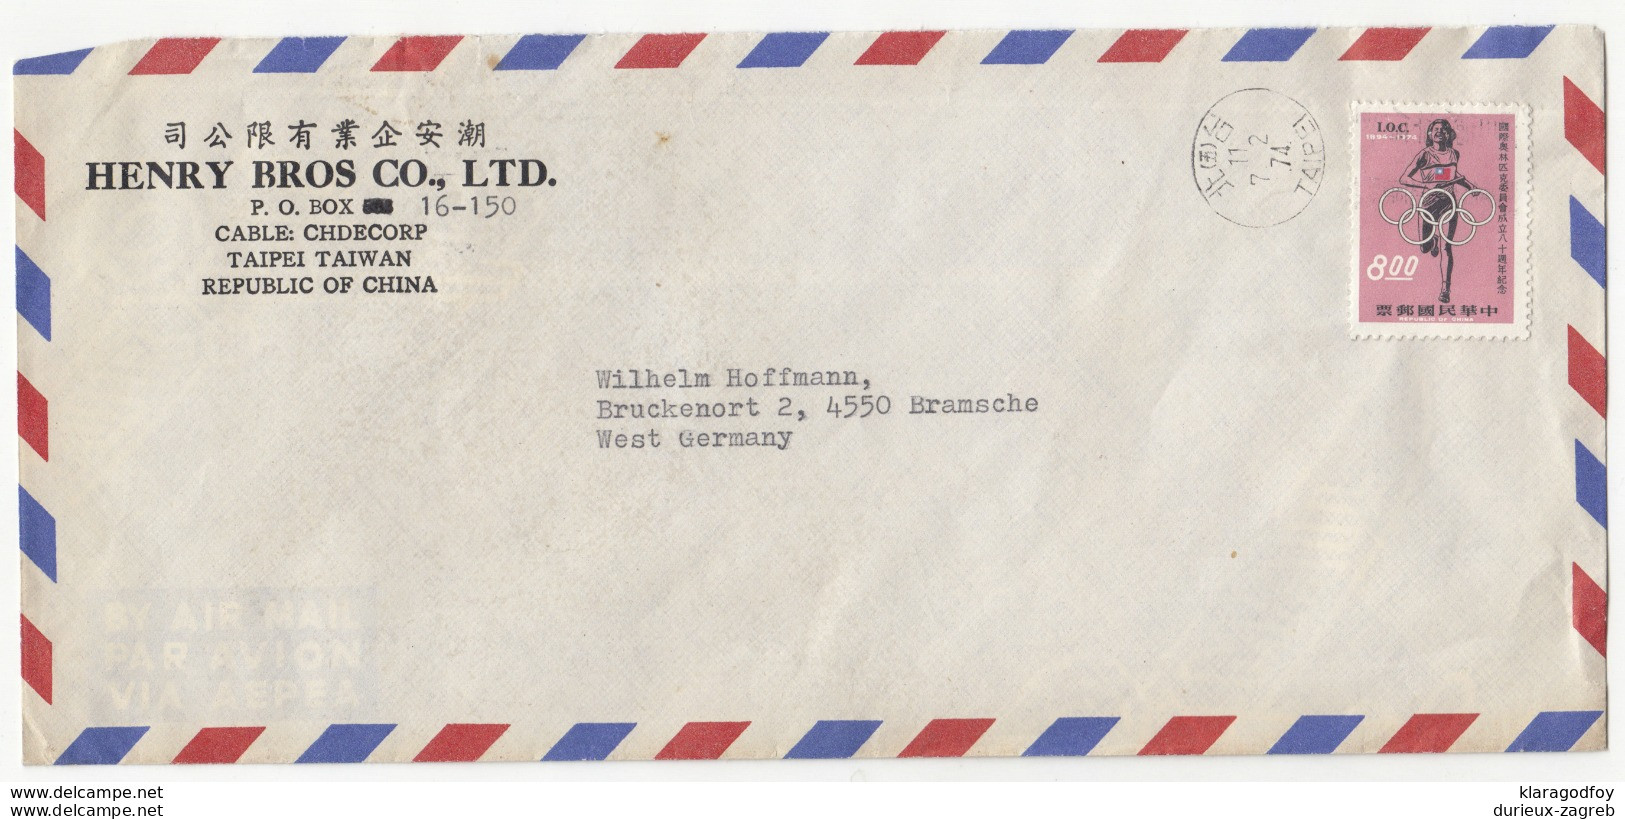 Henry Bros Co. Taipei Company Air Mail Letter Cover Travelled 1974 To Germany  B190920 - Cartas & Documentos